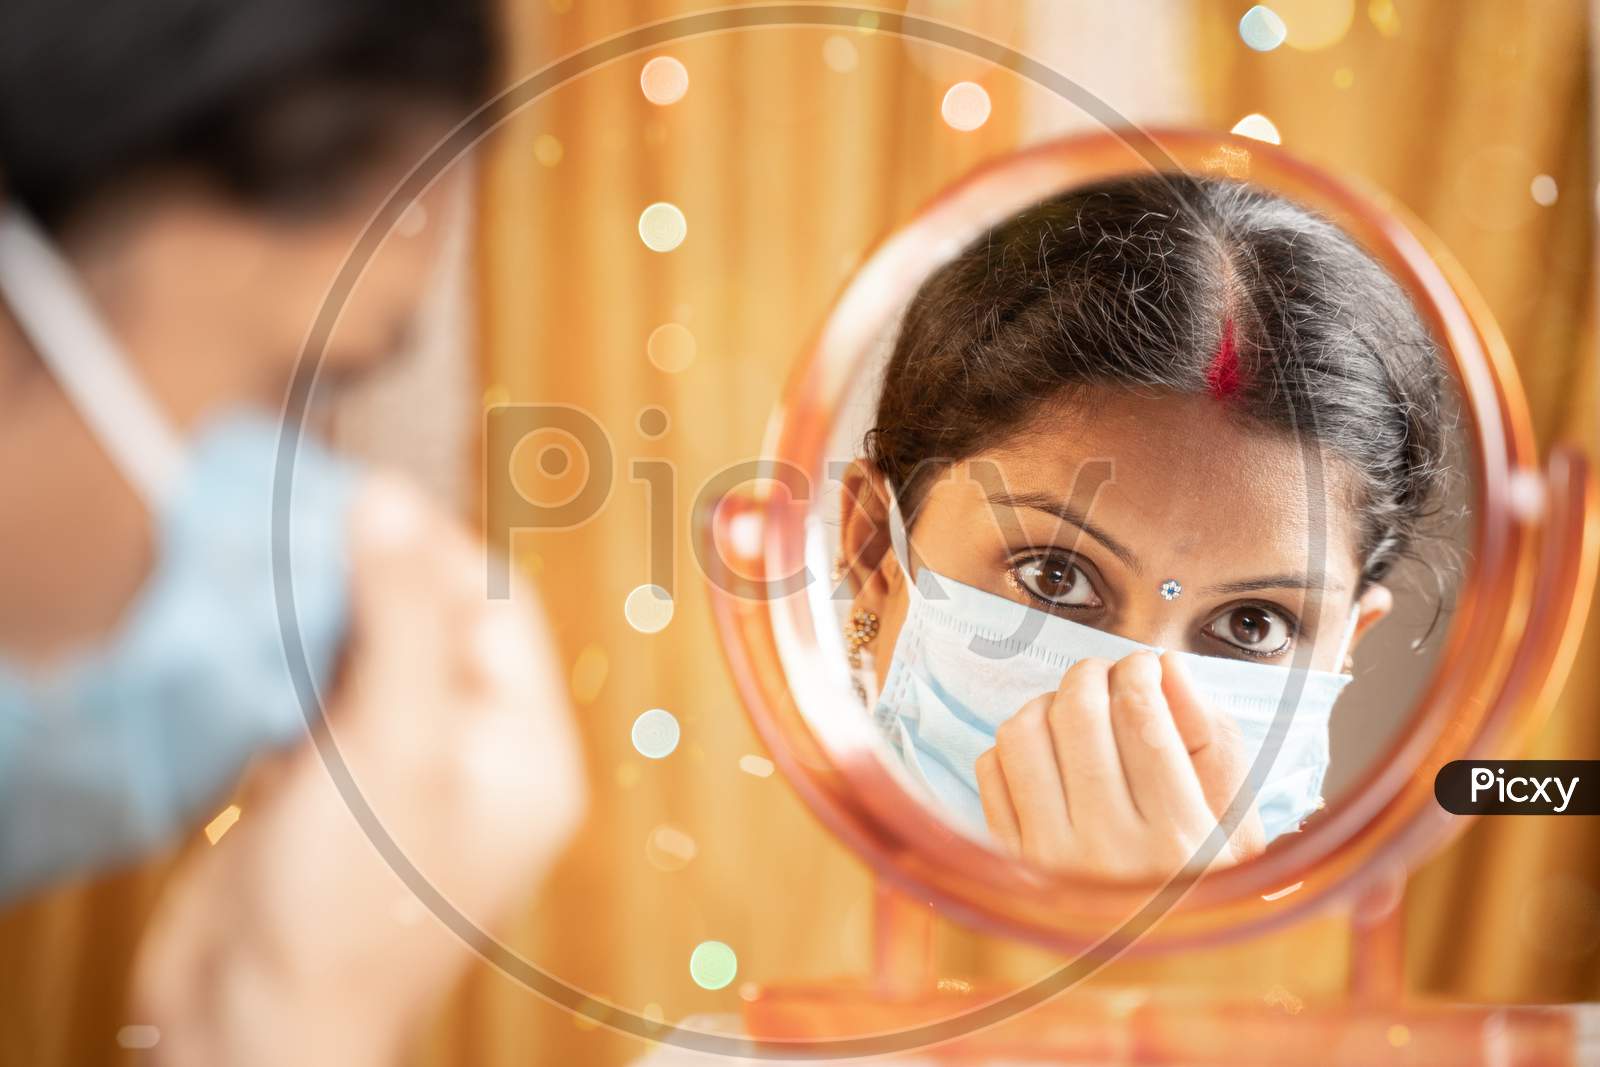 Indian Woman Getting Ready In front Of Mirror By Adjusting Medical Mask Before Going Out During Festival Celebration - Concept Of New Normal Due To Coronavirus Or Covid-19 Pandemic